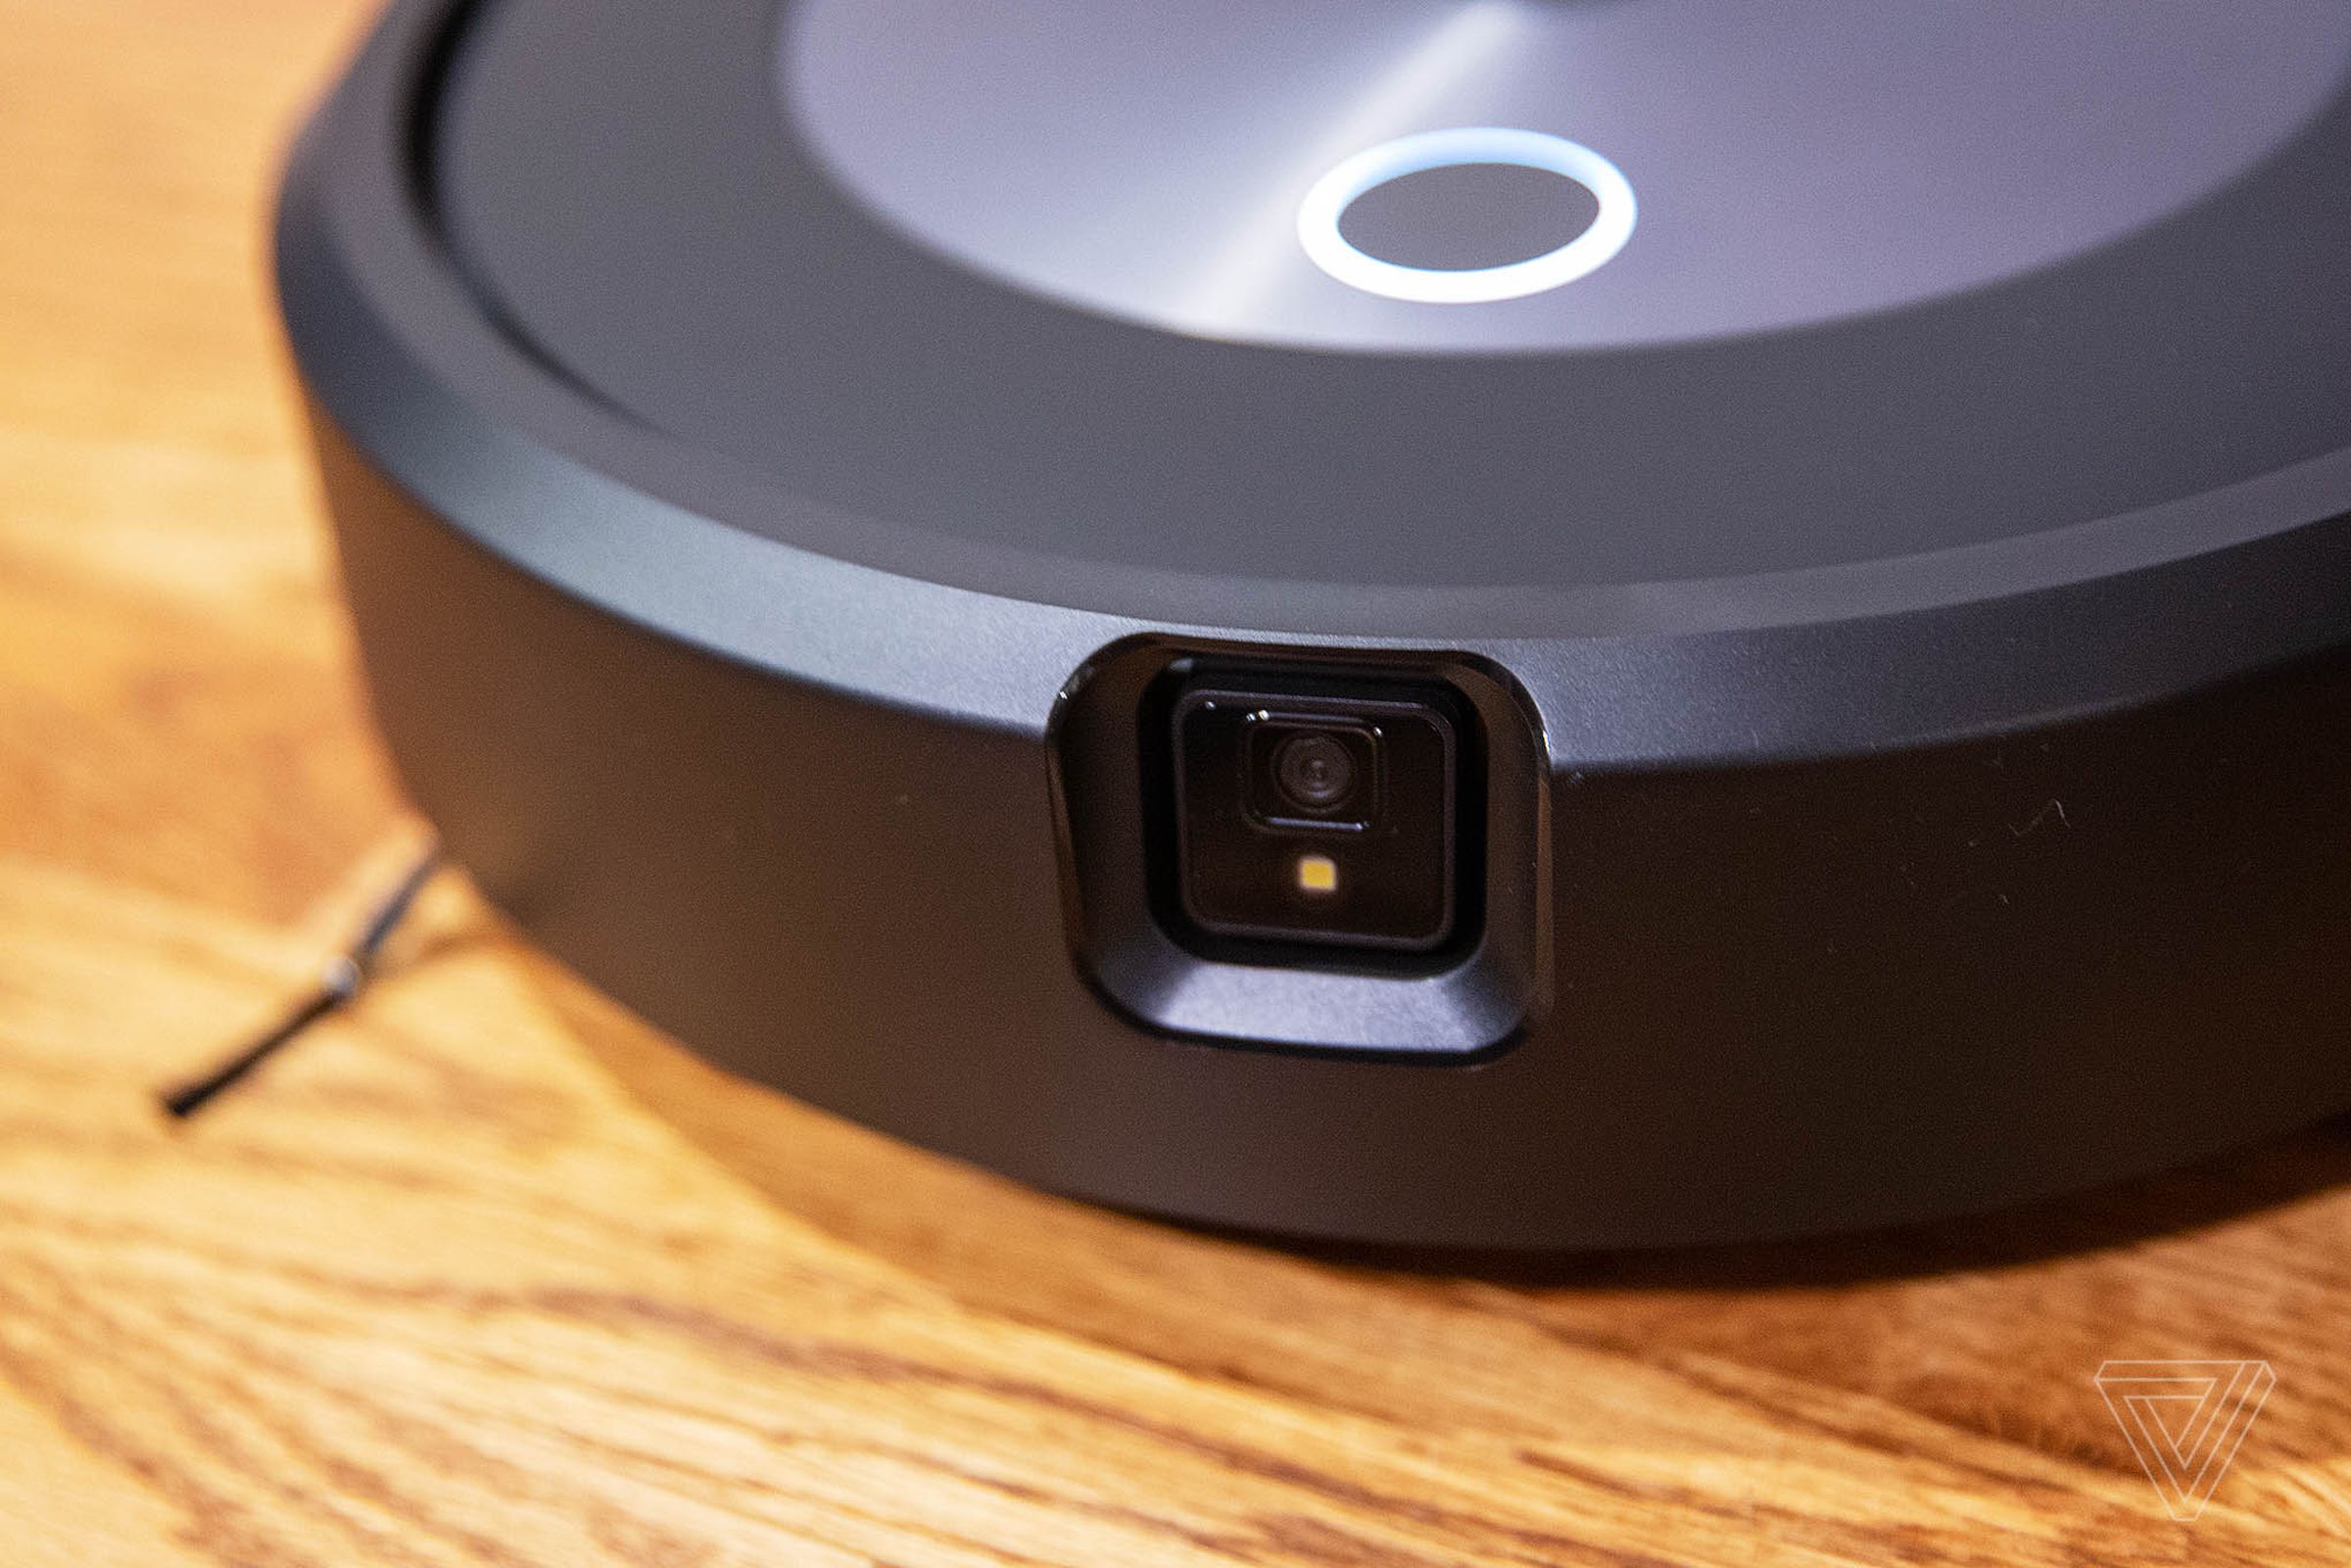 The Roomba j7 has a camera right up front with an LED light that illuminates while it’s working.